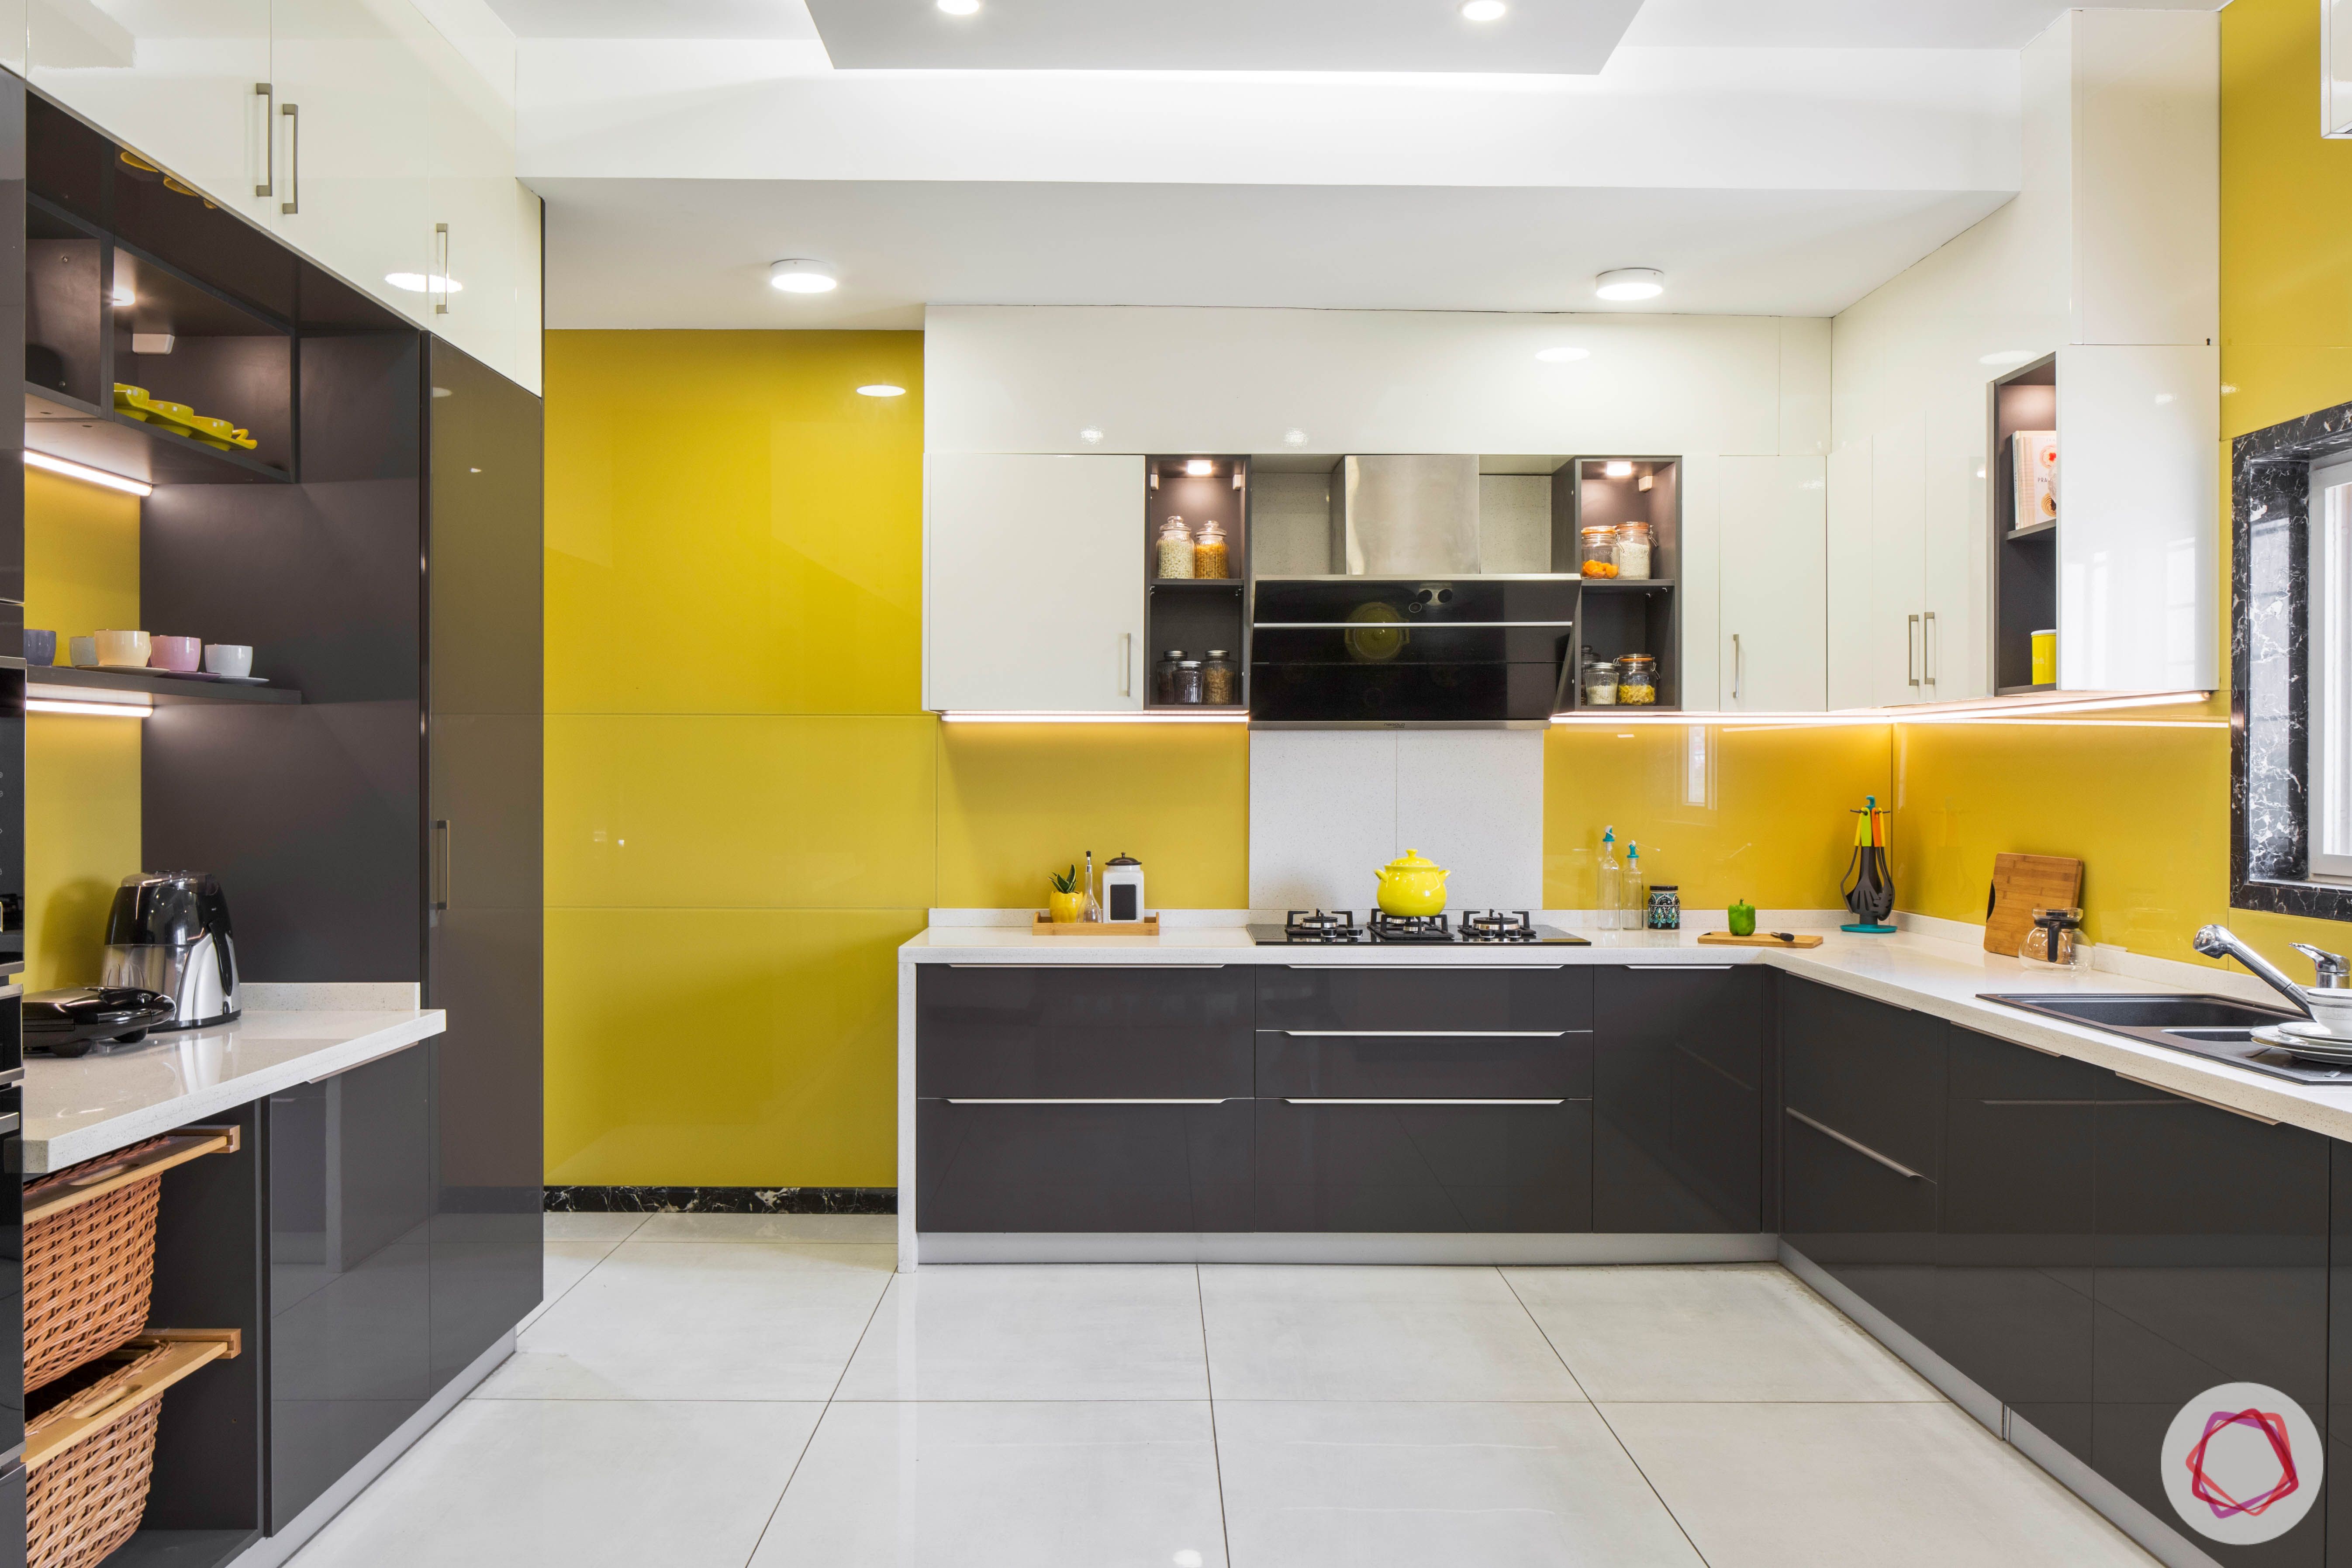 wall-tiles-design-lacquered-glass-backsplash-yellow-white-grey-cabinets